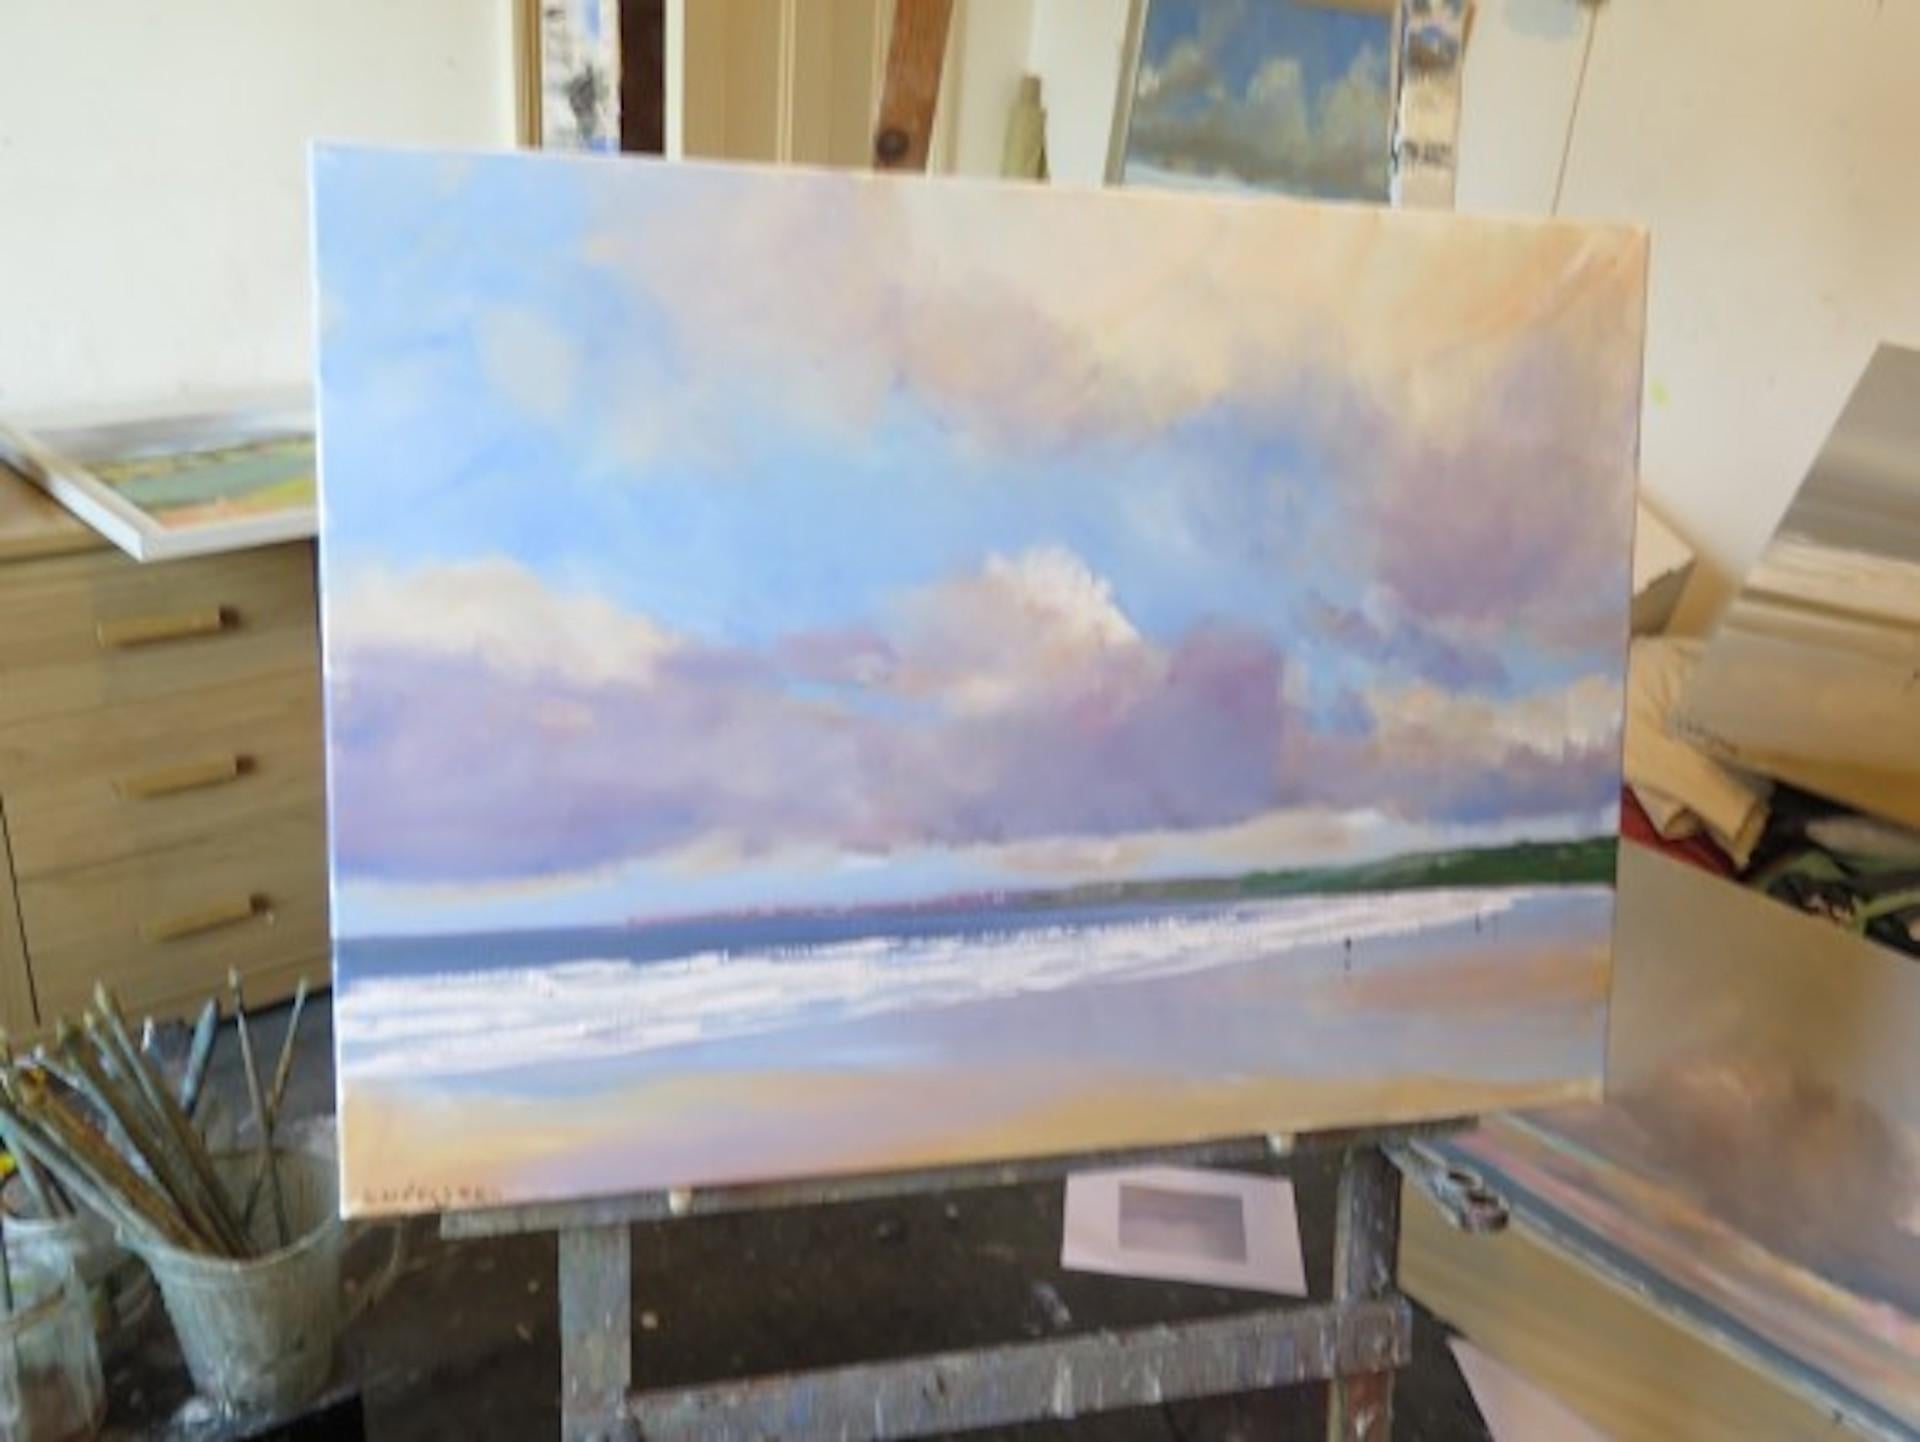 Filey [2020]
Original
Seascapes
oil on canvas
Canvas size: H:65 cm x W:90 cm x D:3cm
Sold unframed
Please note that insitu images are purely an indication of how a piece may look

Painted from the clifftop above Filey Bay looking towards Bempton